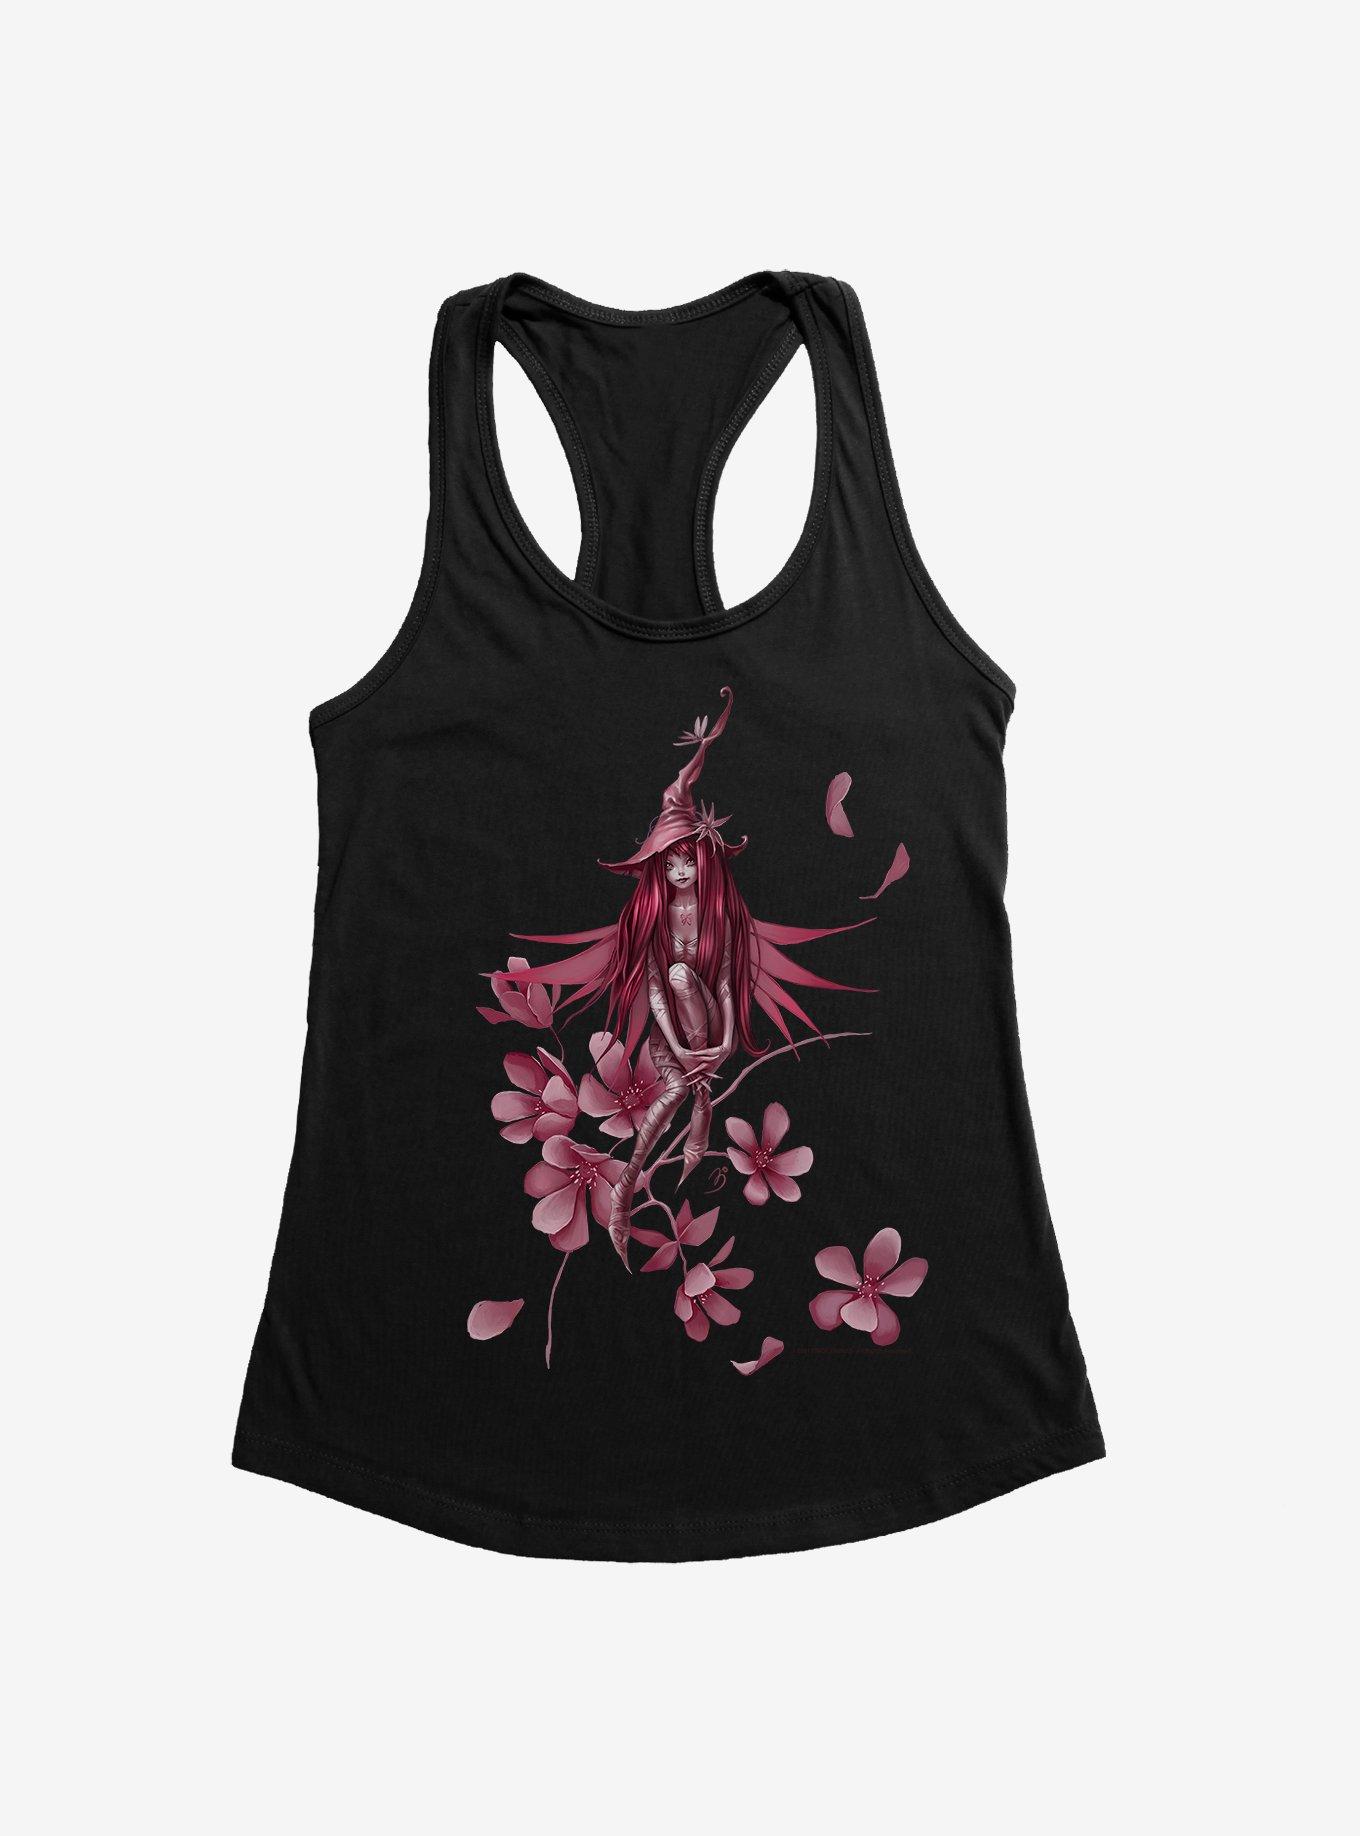 Fairies By Trick Blooming Fairy Girls Tank